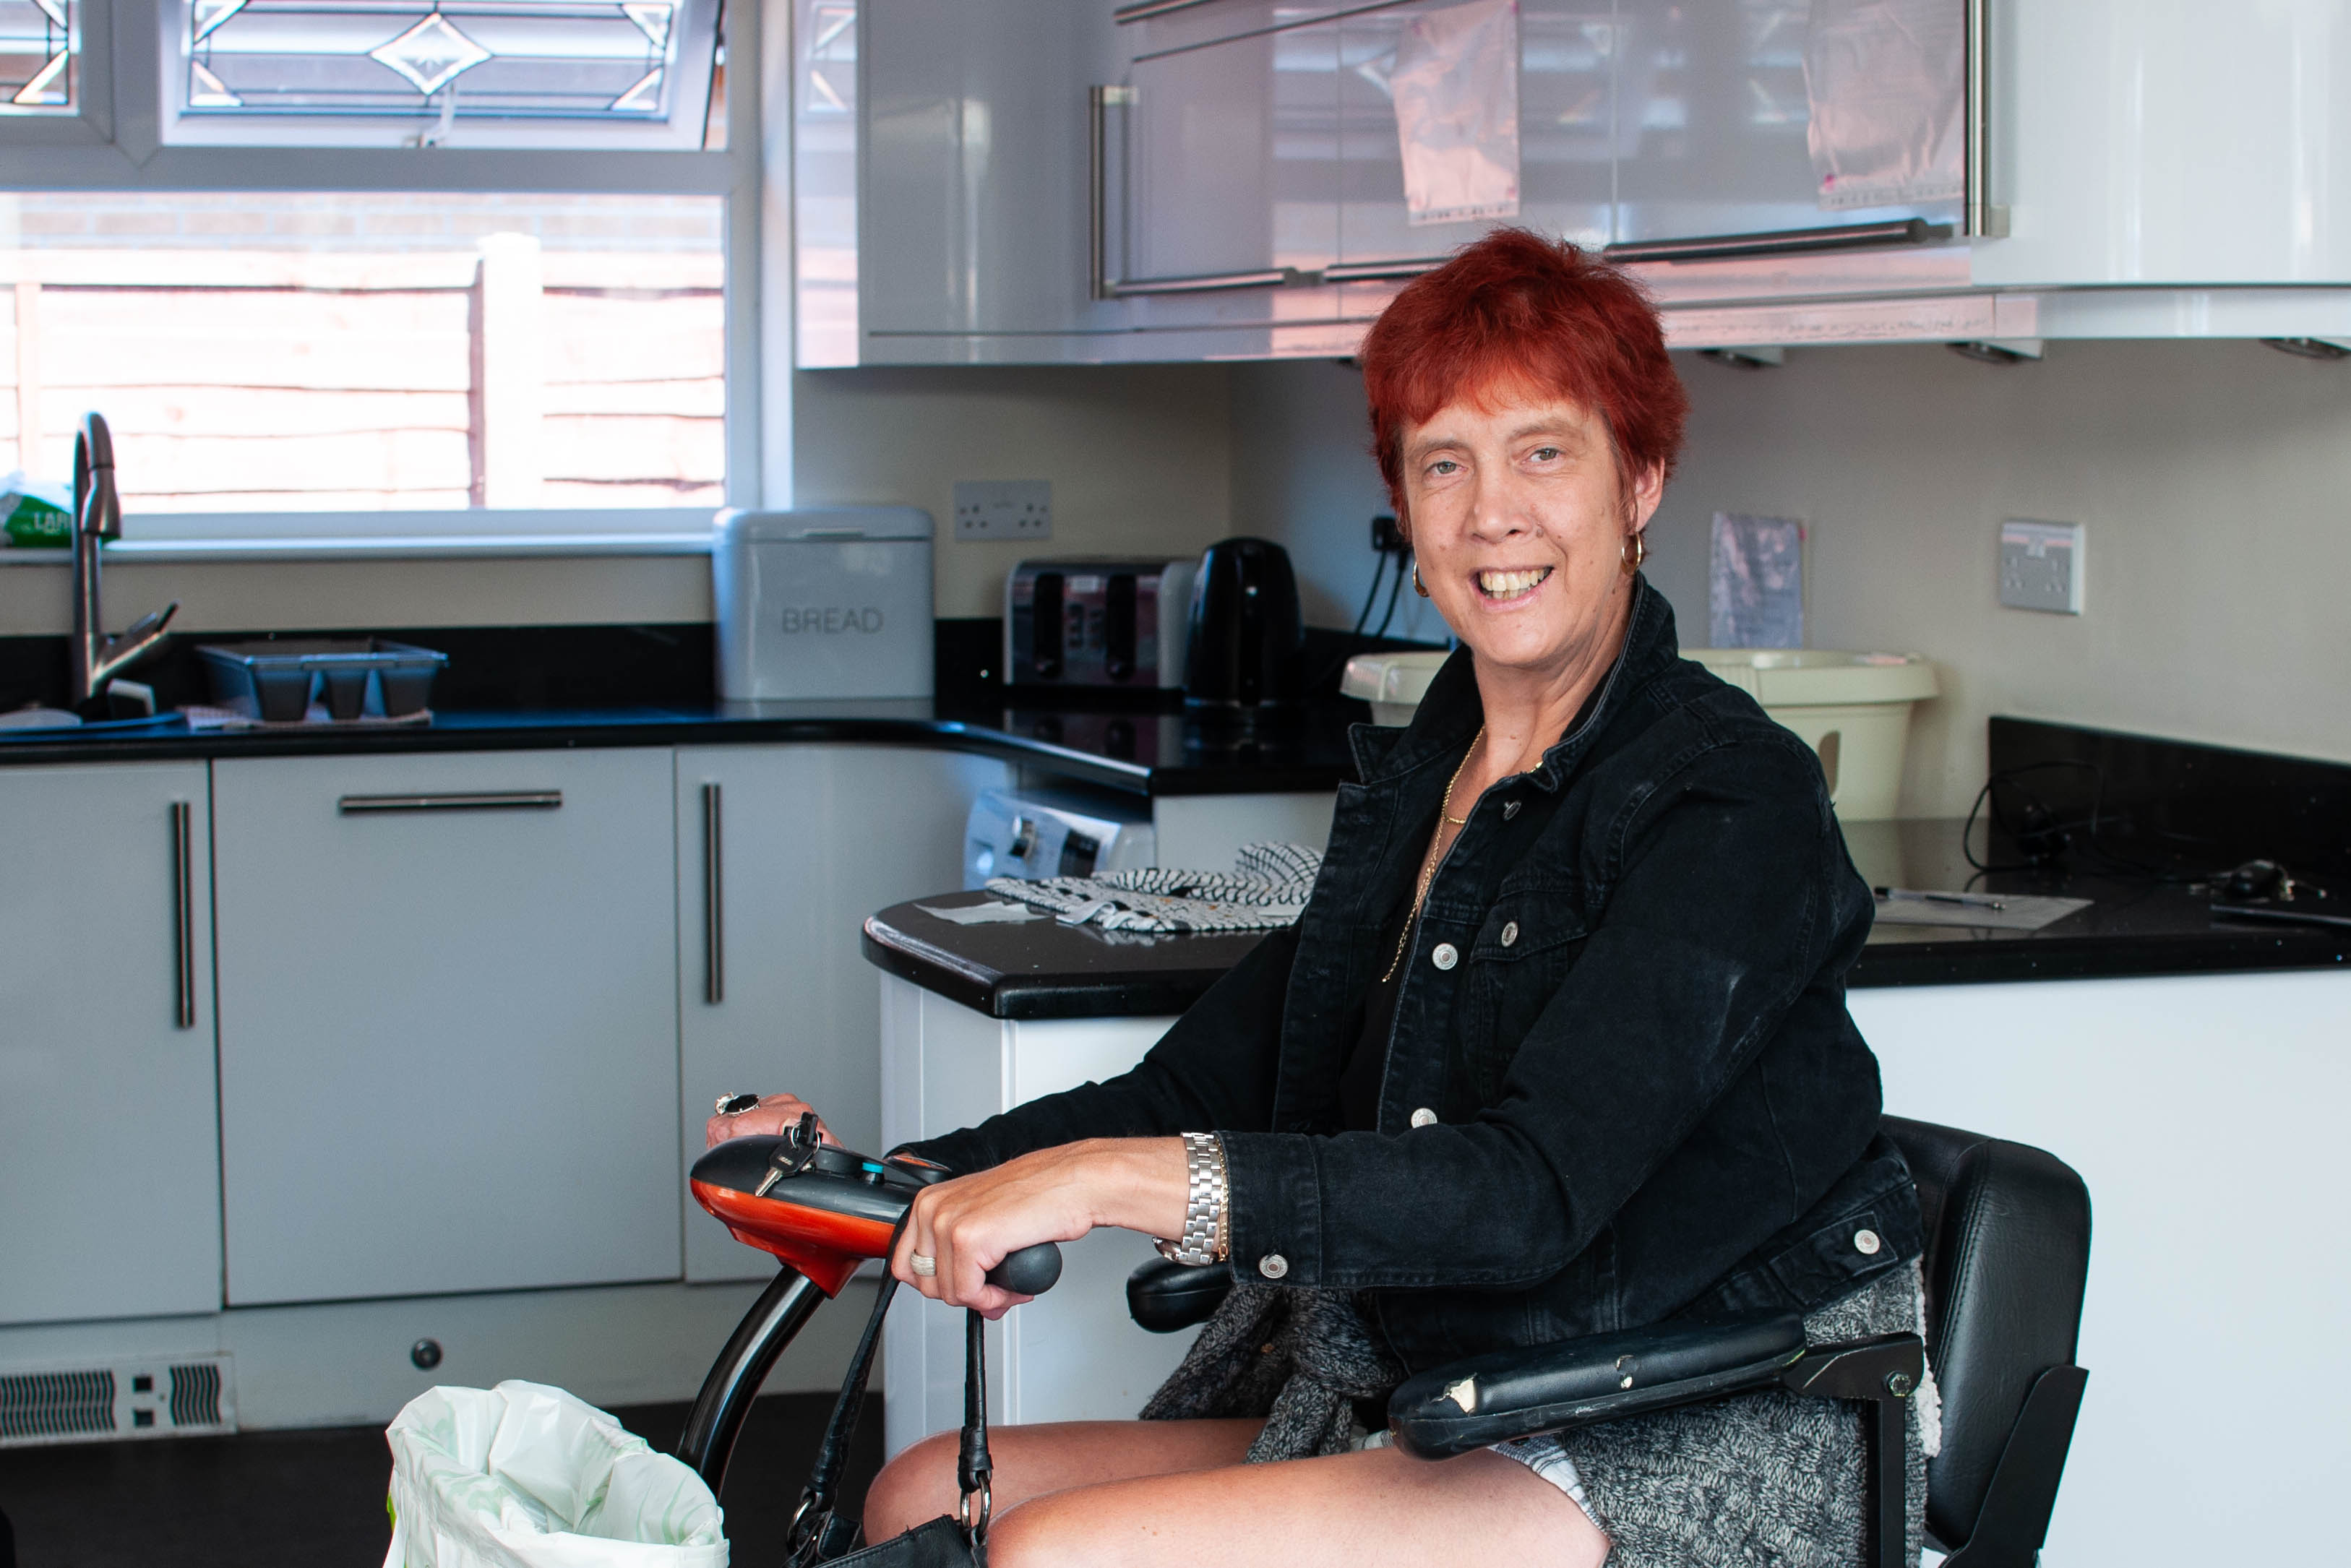 A woman with short red hair sitting on a mobility scooter smiling at the camera